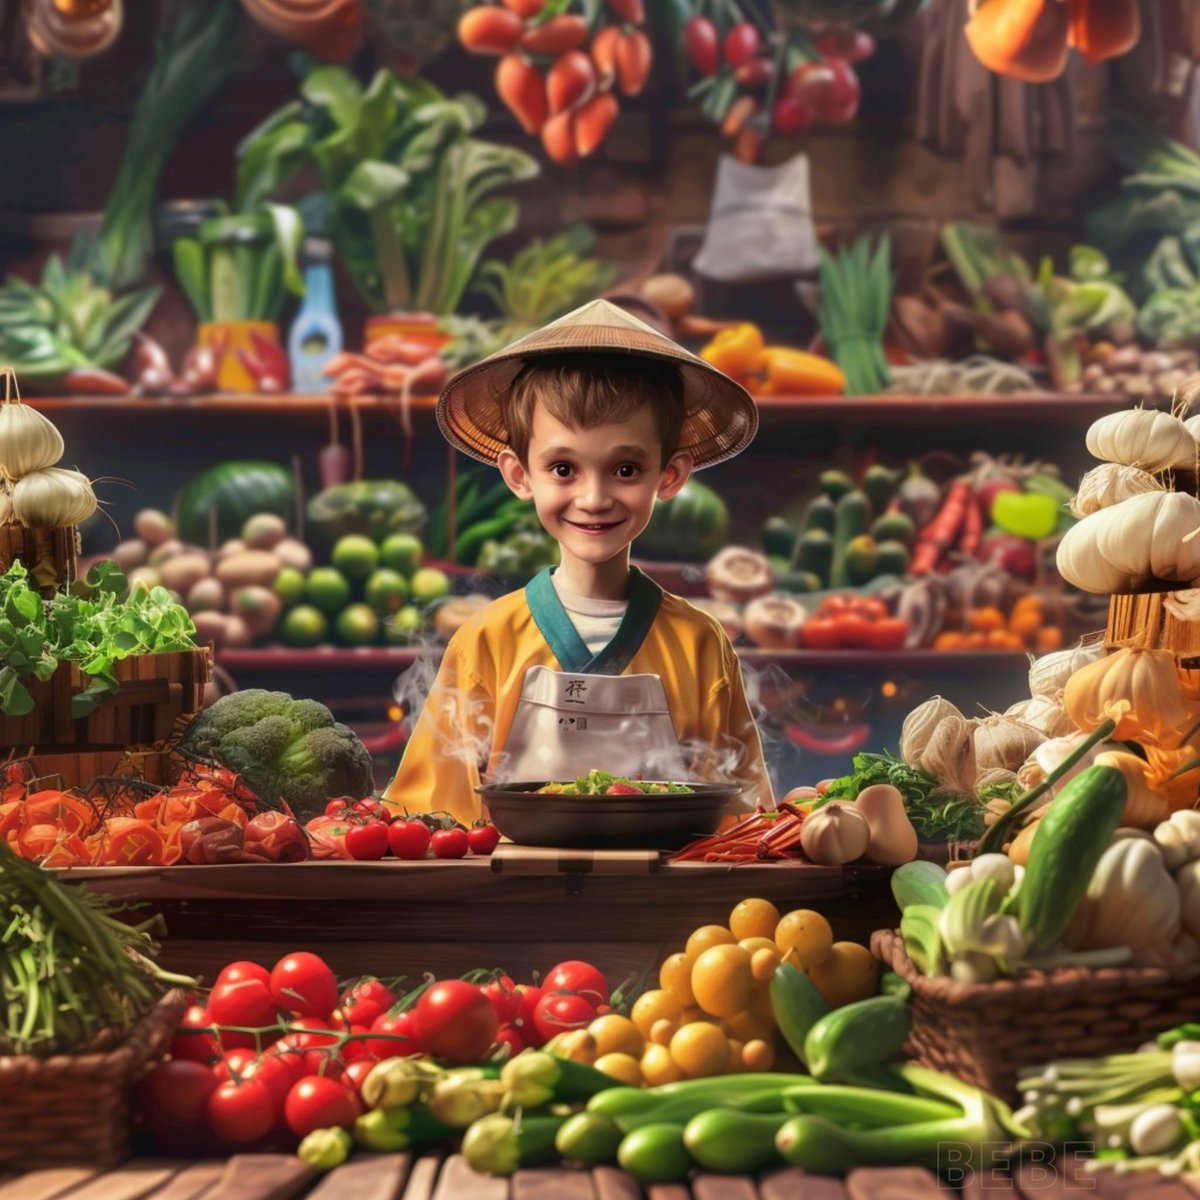 I have been a vegetarian since I was young, I hate all meat.
Vegetables are everything🥬
In my opinion, tomatoes, broccoli, avocados, lettuce, and blackberries are the best foods.🍅🥦🥑
@VitalikButerin